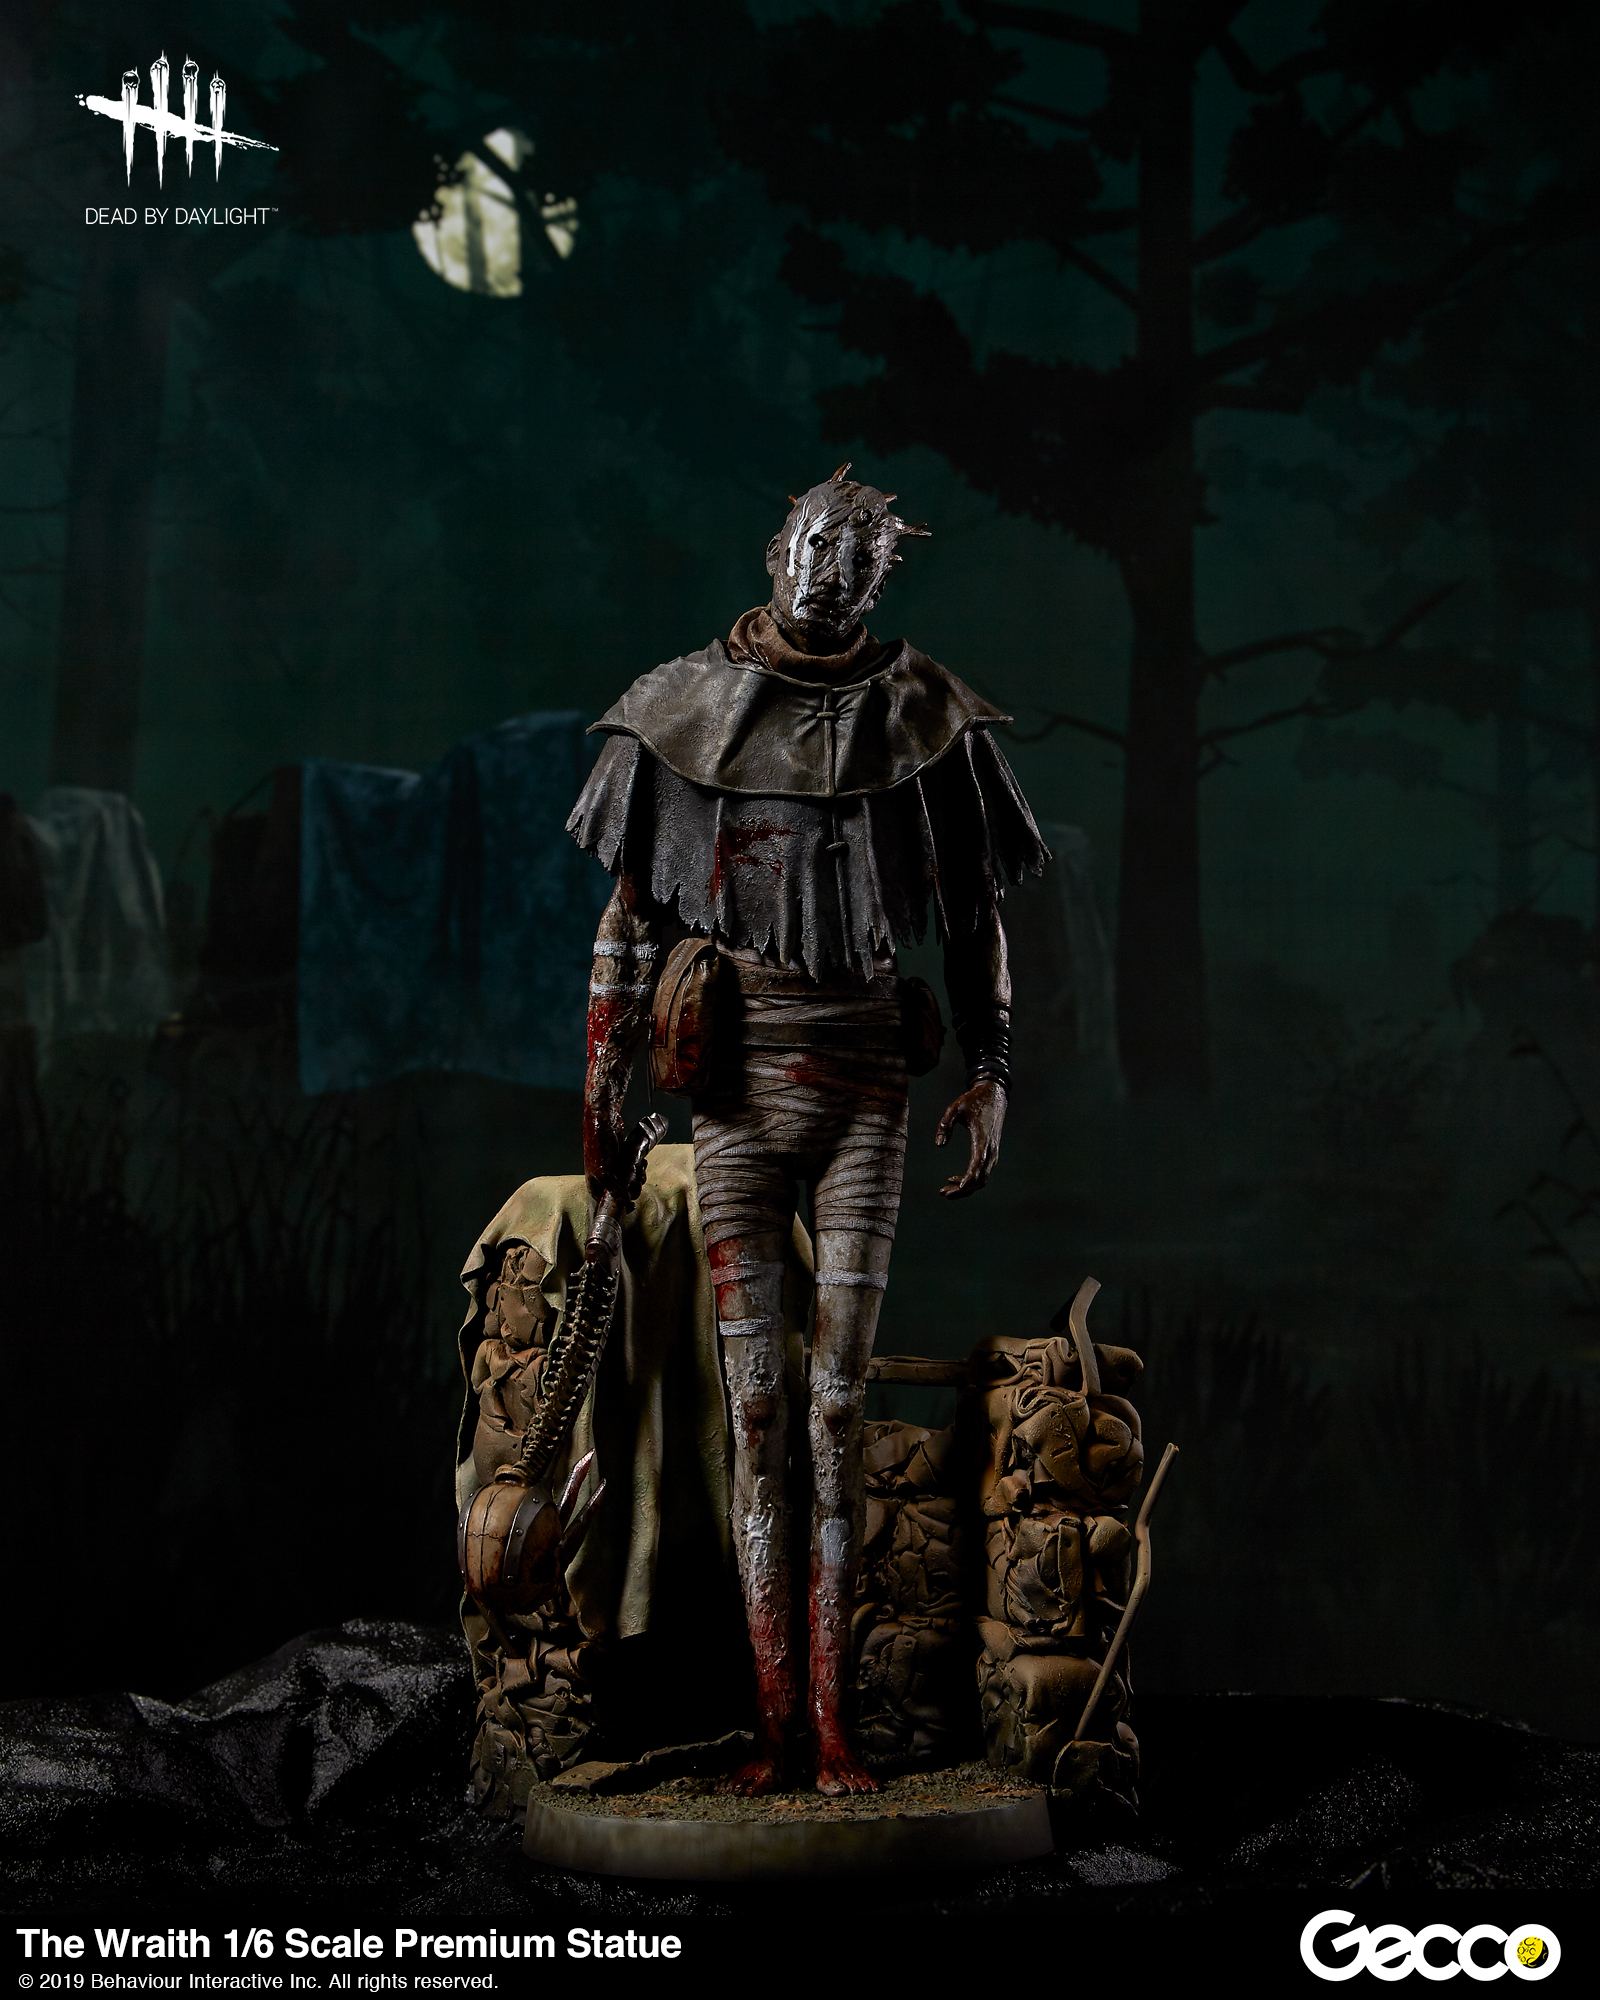 DEAD BY DAYLIGHT 1/6 SCALE STATUE: THE WRAITH Gecco